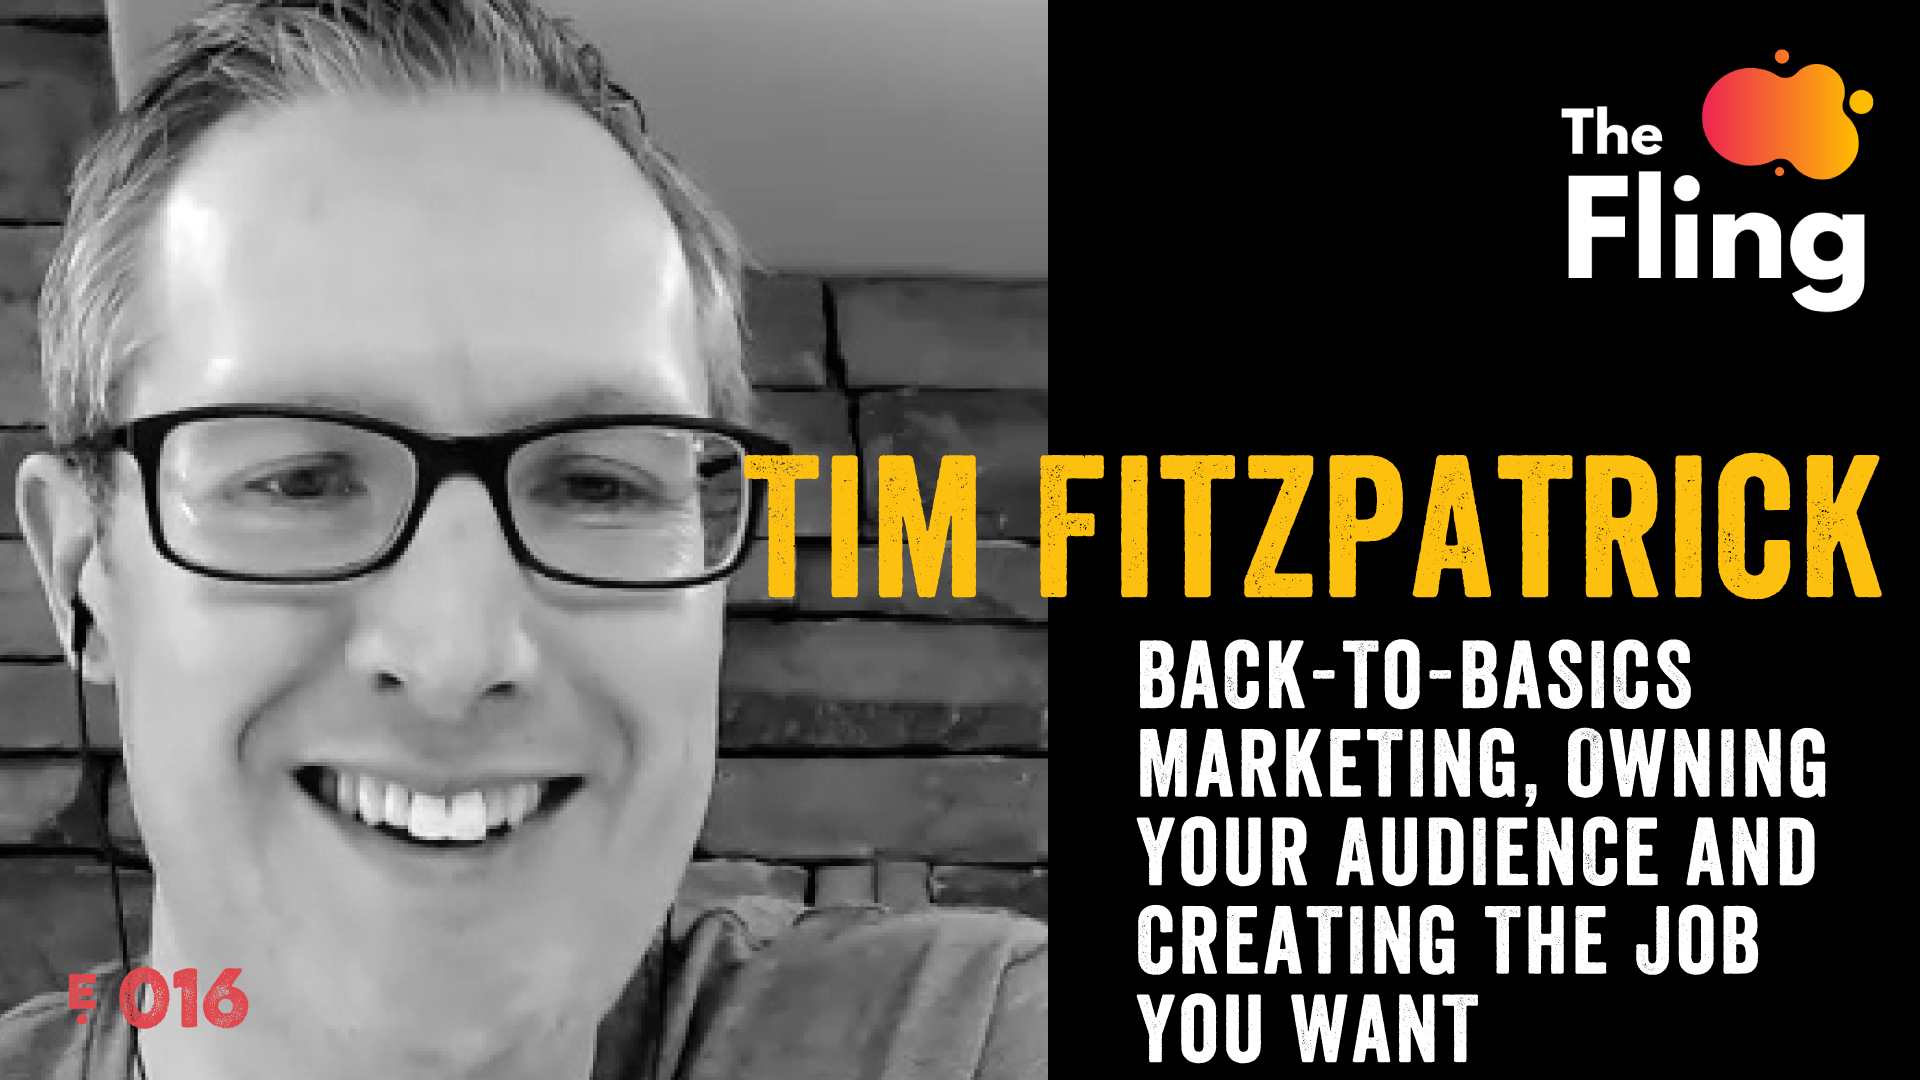 Tim Fitzpatrick, Back-to-Basics Marketing and Owning Your Audience